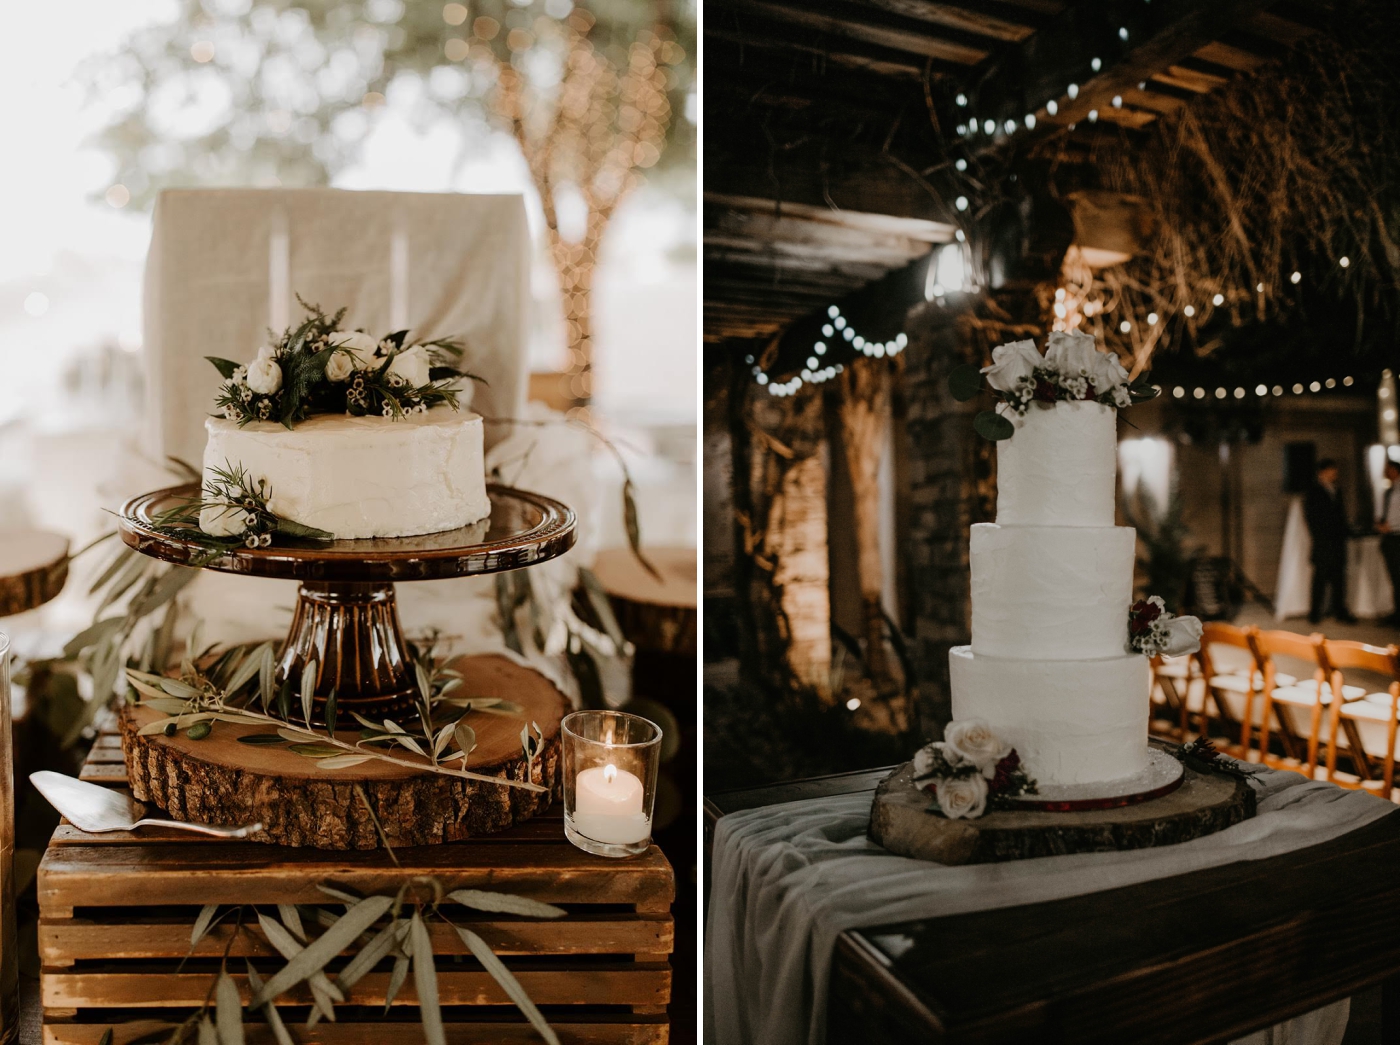 How to highlight your wedding cake at your Arizona Wedding